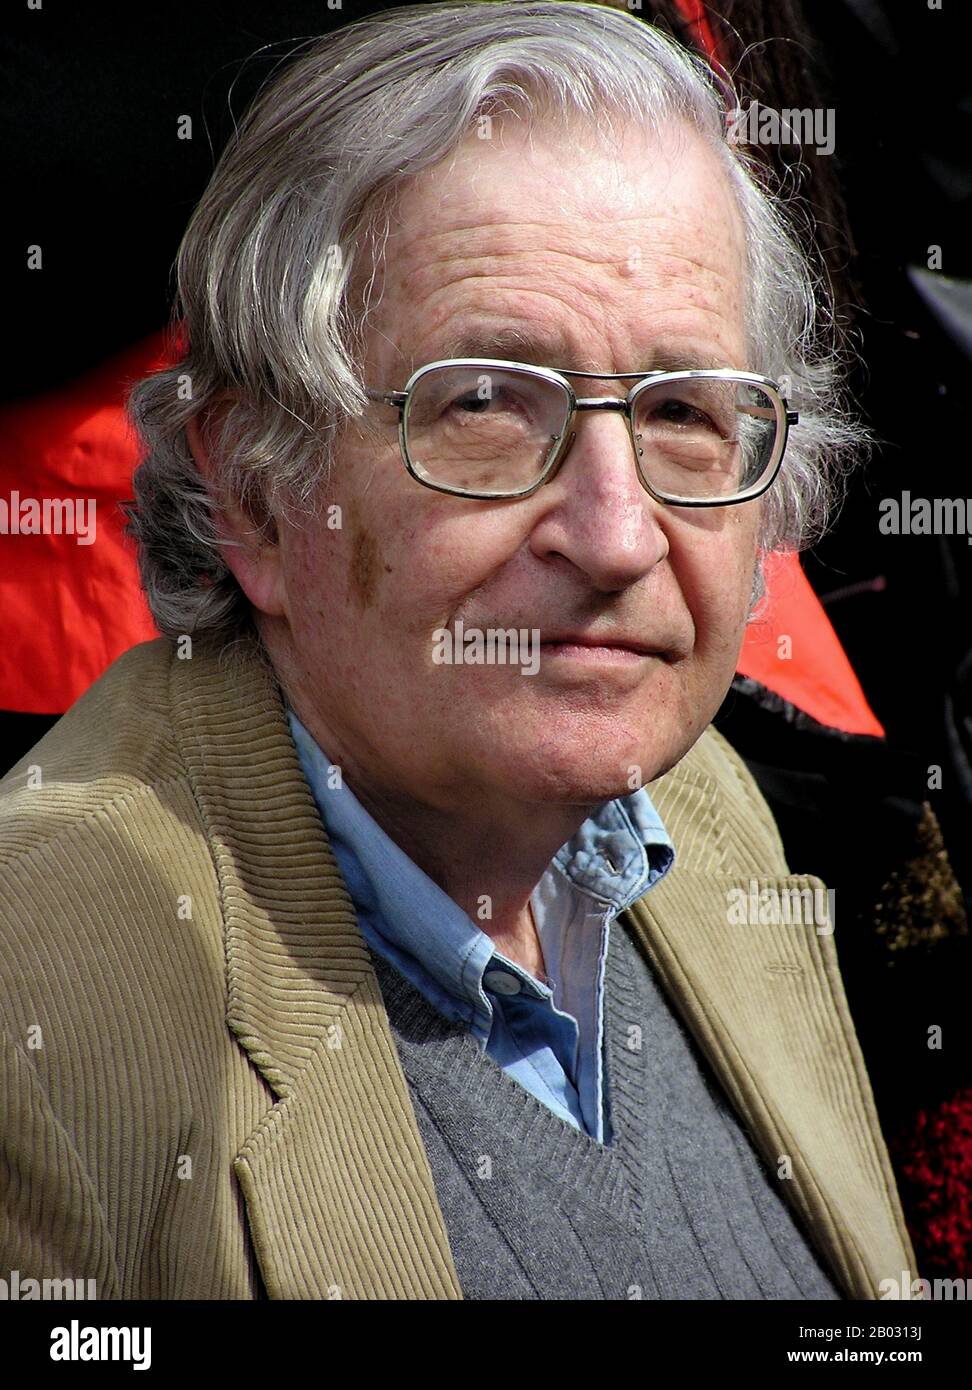 Avram Noam Chomsky (born December 7, 1928) is an American linguist, philosopher, cognitive scientist, logician, political commentator, social justice activist, and anarcho-syndicalist. Sometimes described as the 'father of modern linguistics', Chomsky is also a major figure in analytic philosophy.  Chomsky has spent most of his career at the Massachusetts Institute of Technology (MIT), where he is currently Professor Emeritus, and has authored over 100 books. Stock Photo